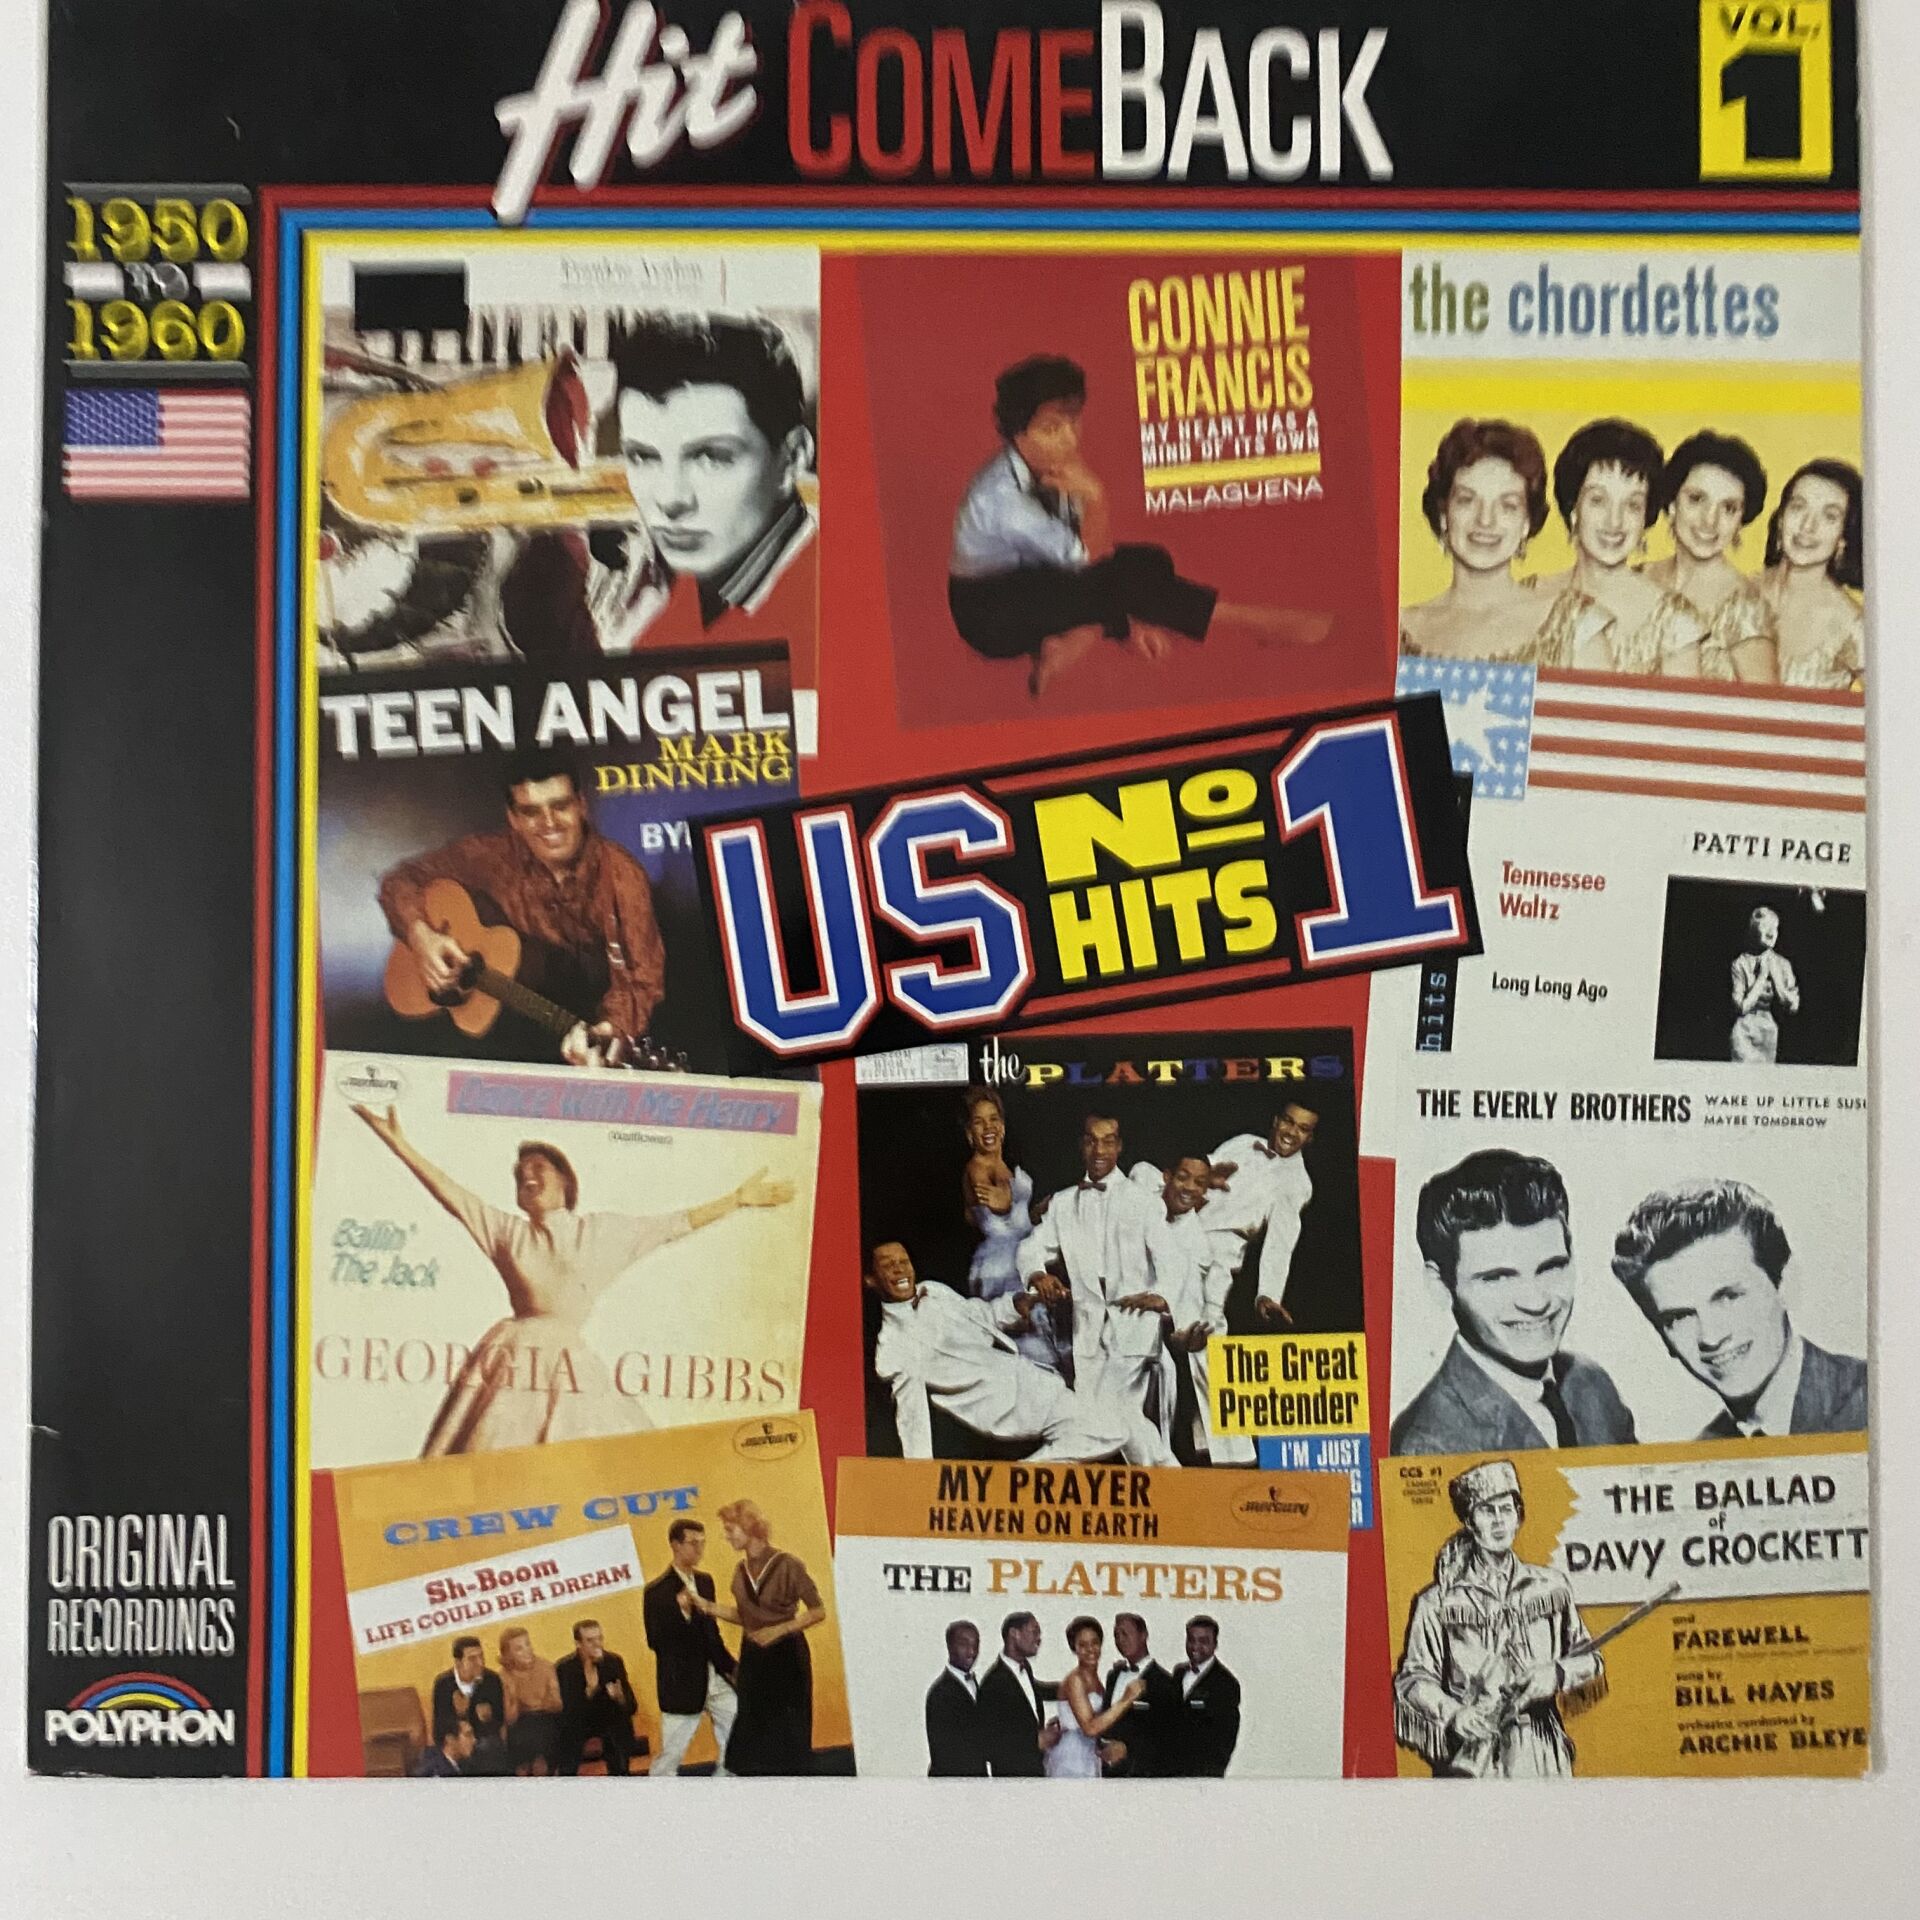 Hit Come Back No. 1 In USA • Vol. 1 1950 To 1960